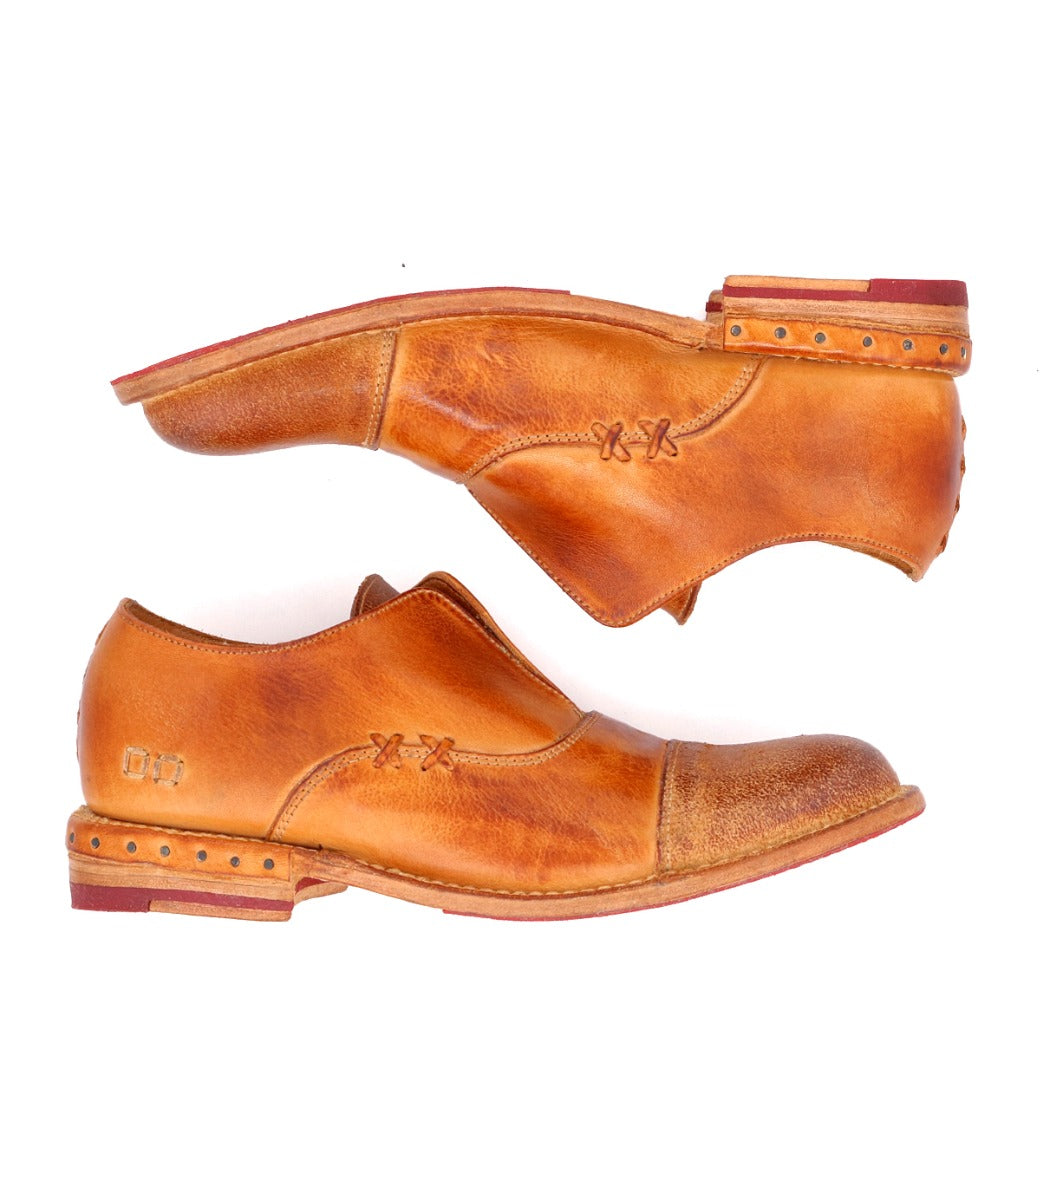 A pair of men's Rose shoes with Bed Stu tan soles.